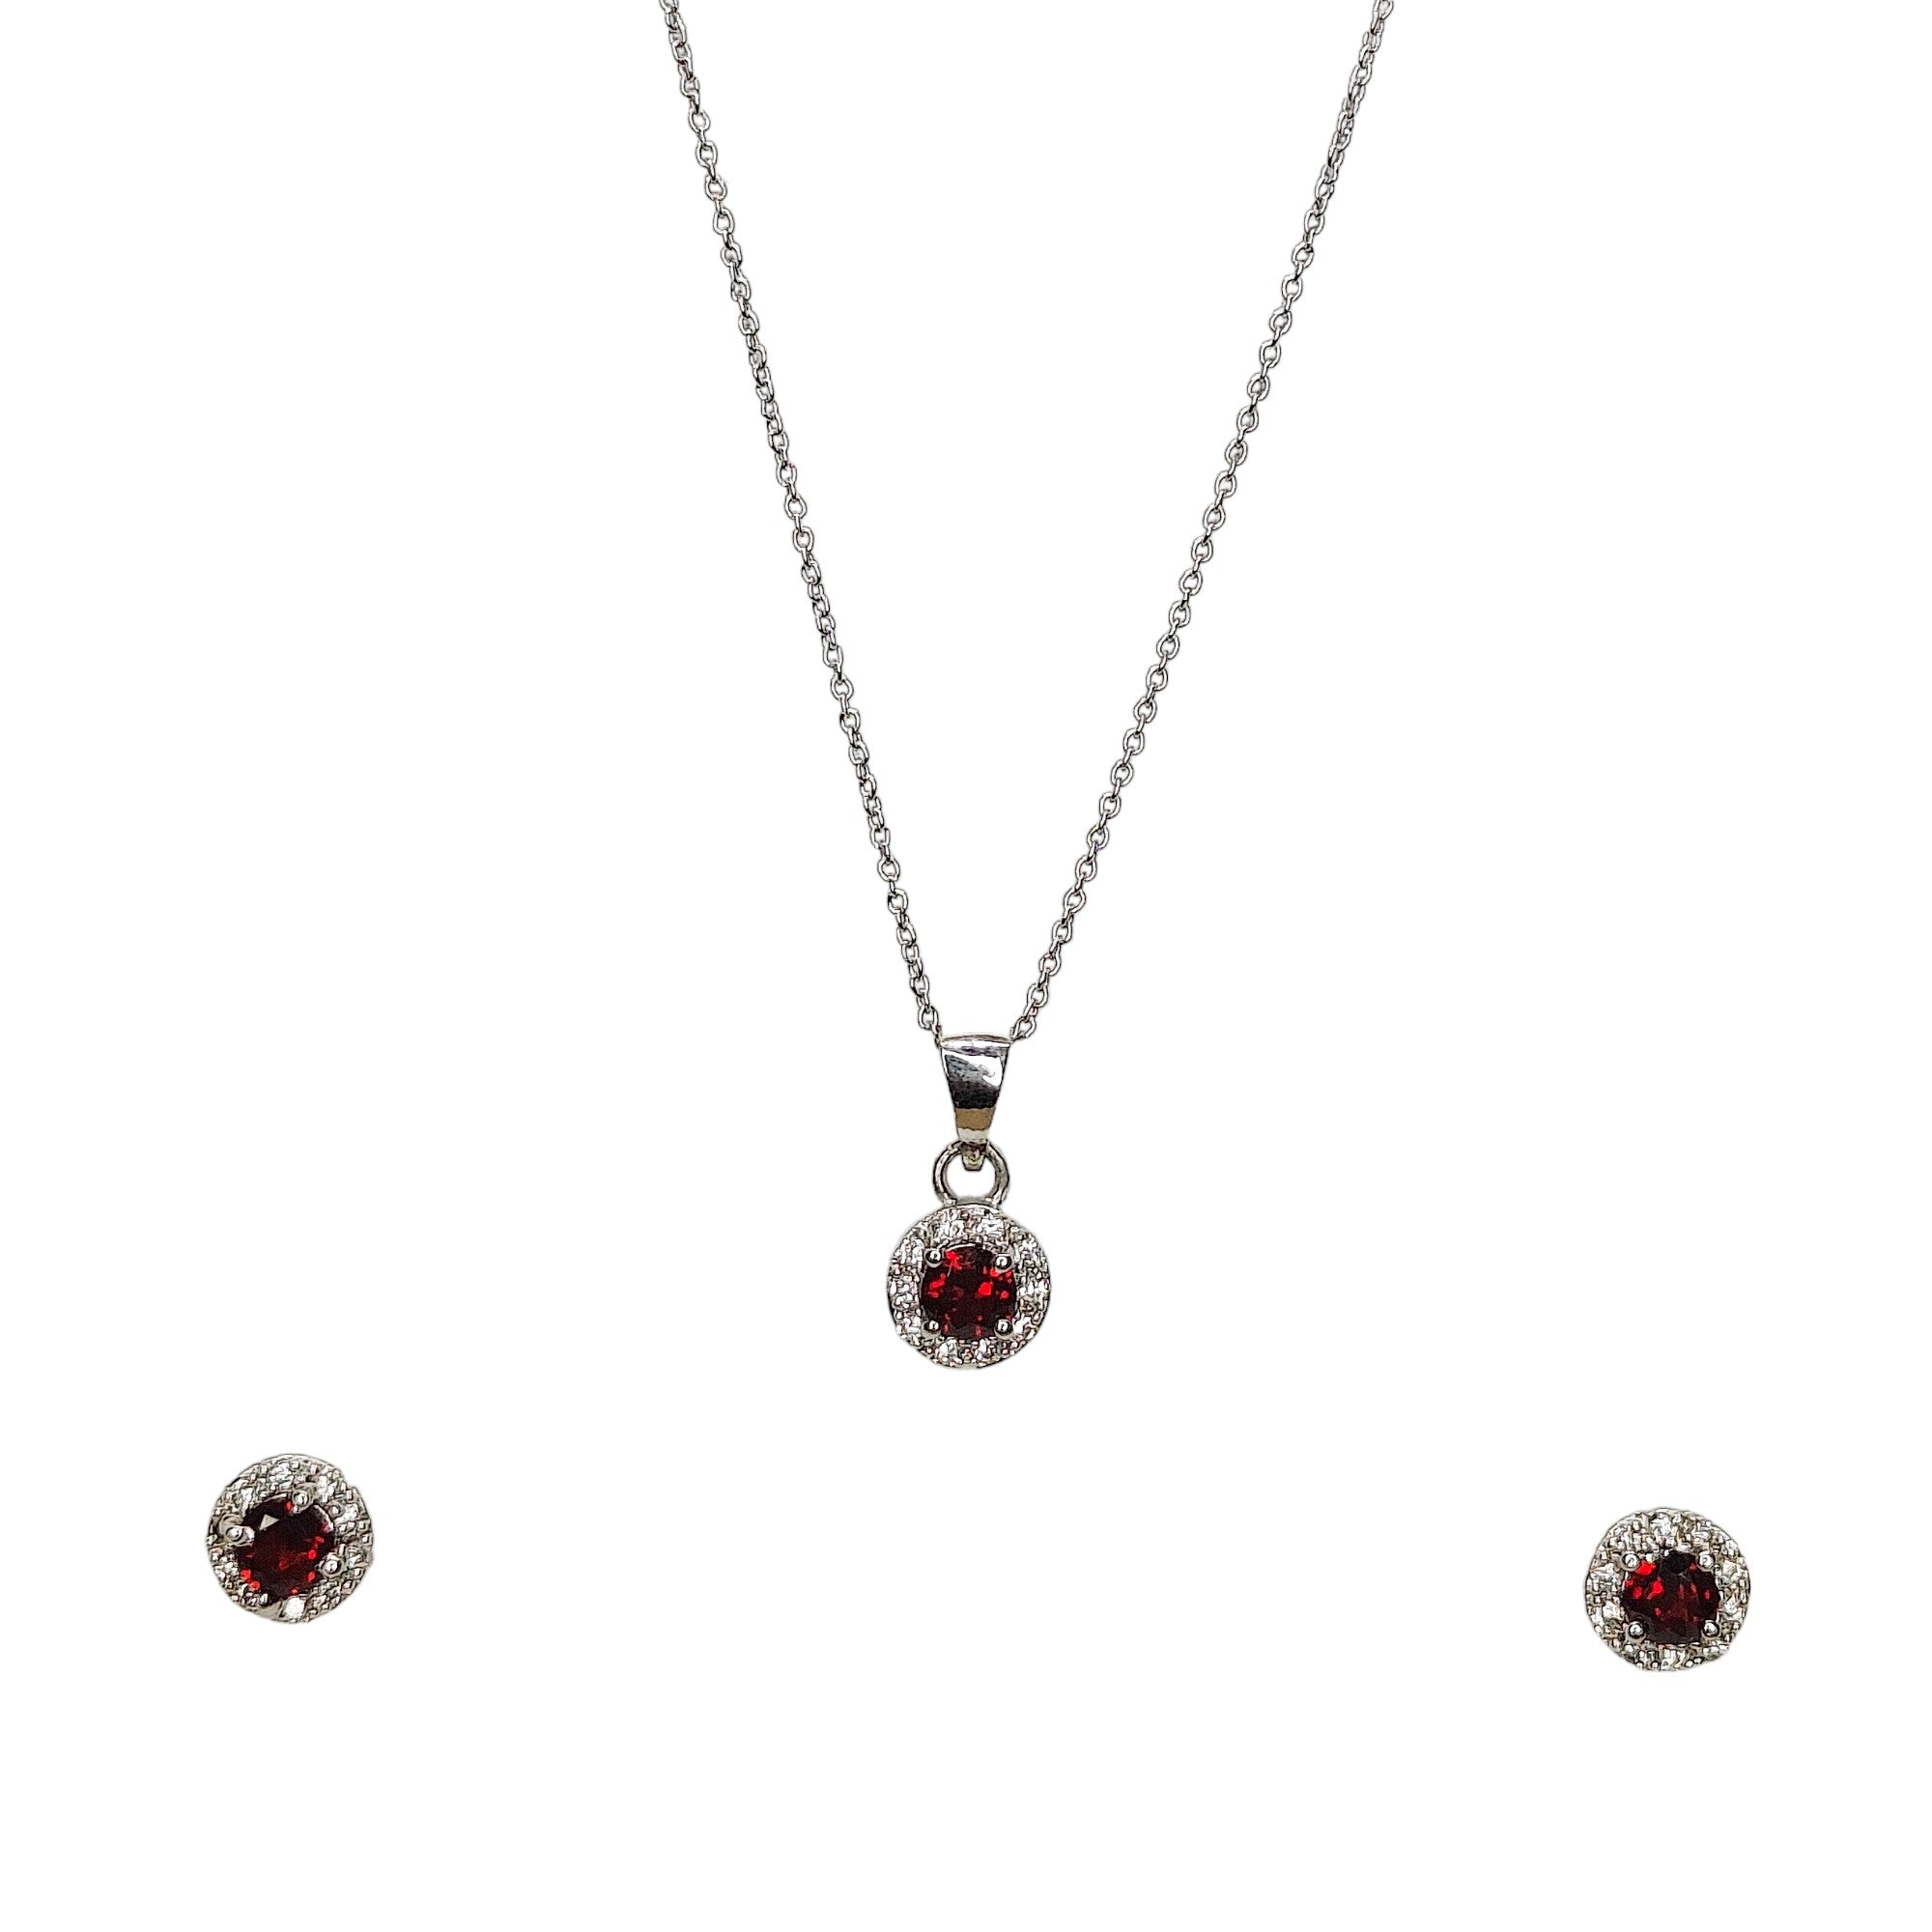 Red Gemstone Pendent Set With Chain for Modern Muses - Rivansh